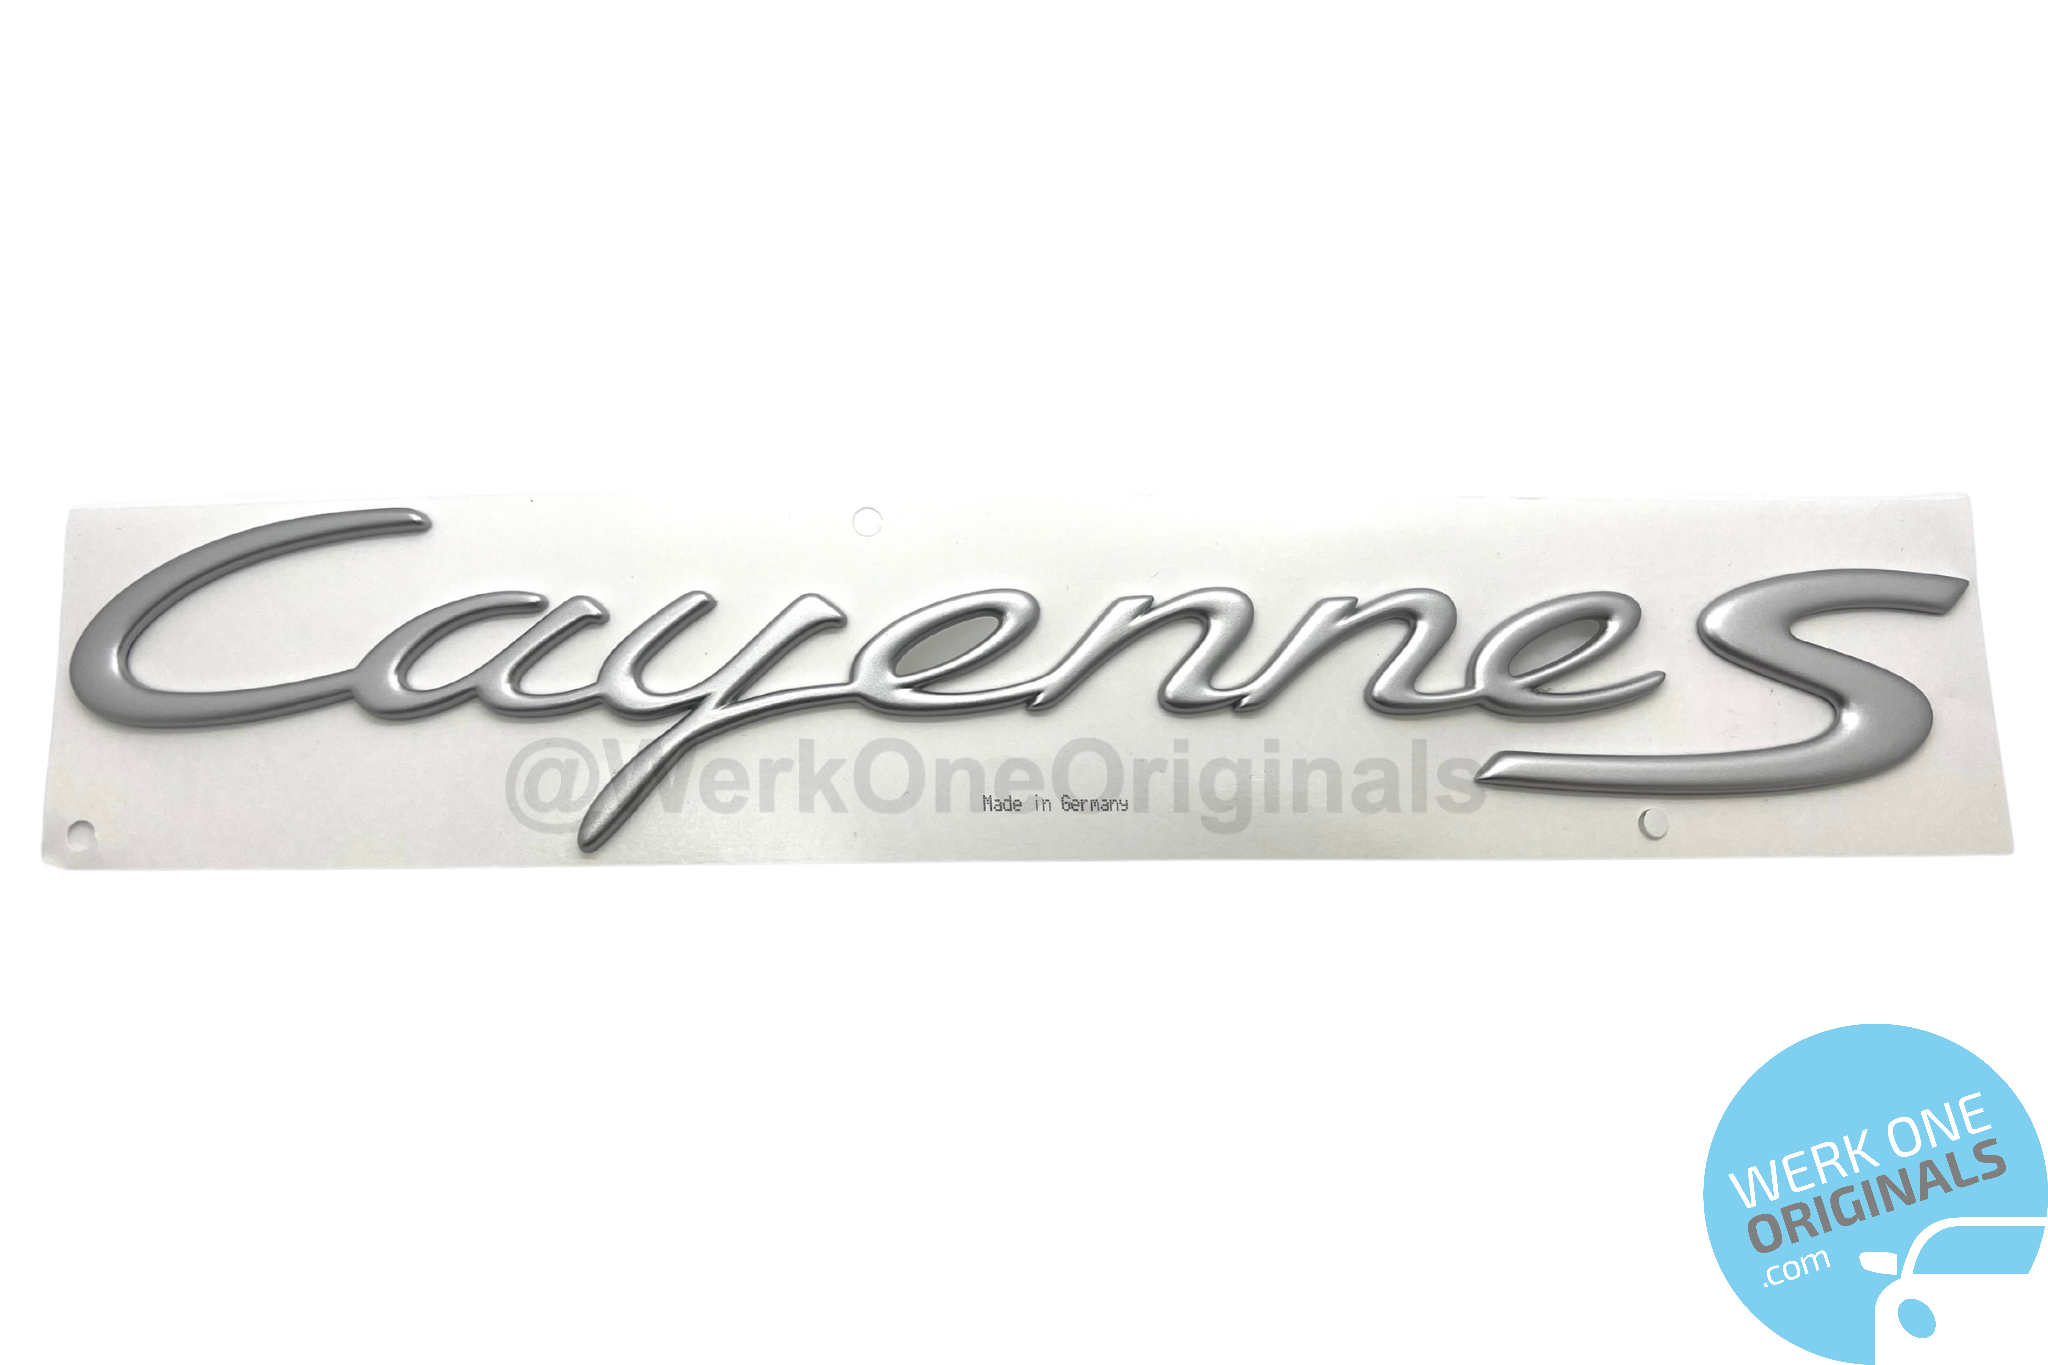 Porsche 'Cayenne S' Rear Badge Decal in Matte Silver for Cayenne S Type 955 & 957 Models